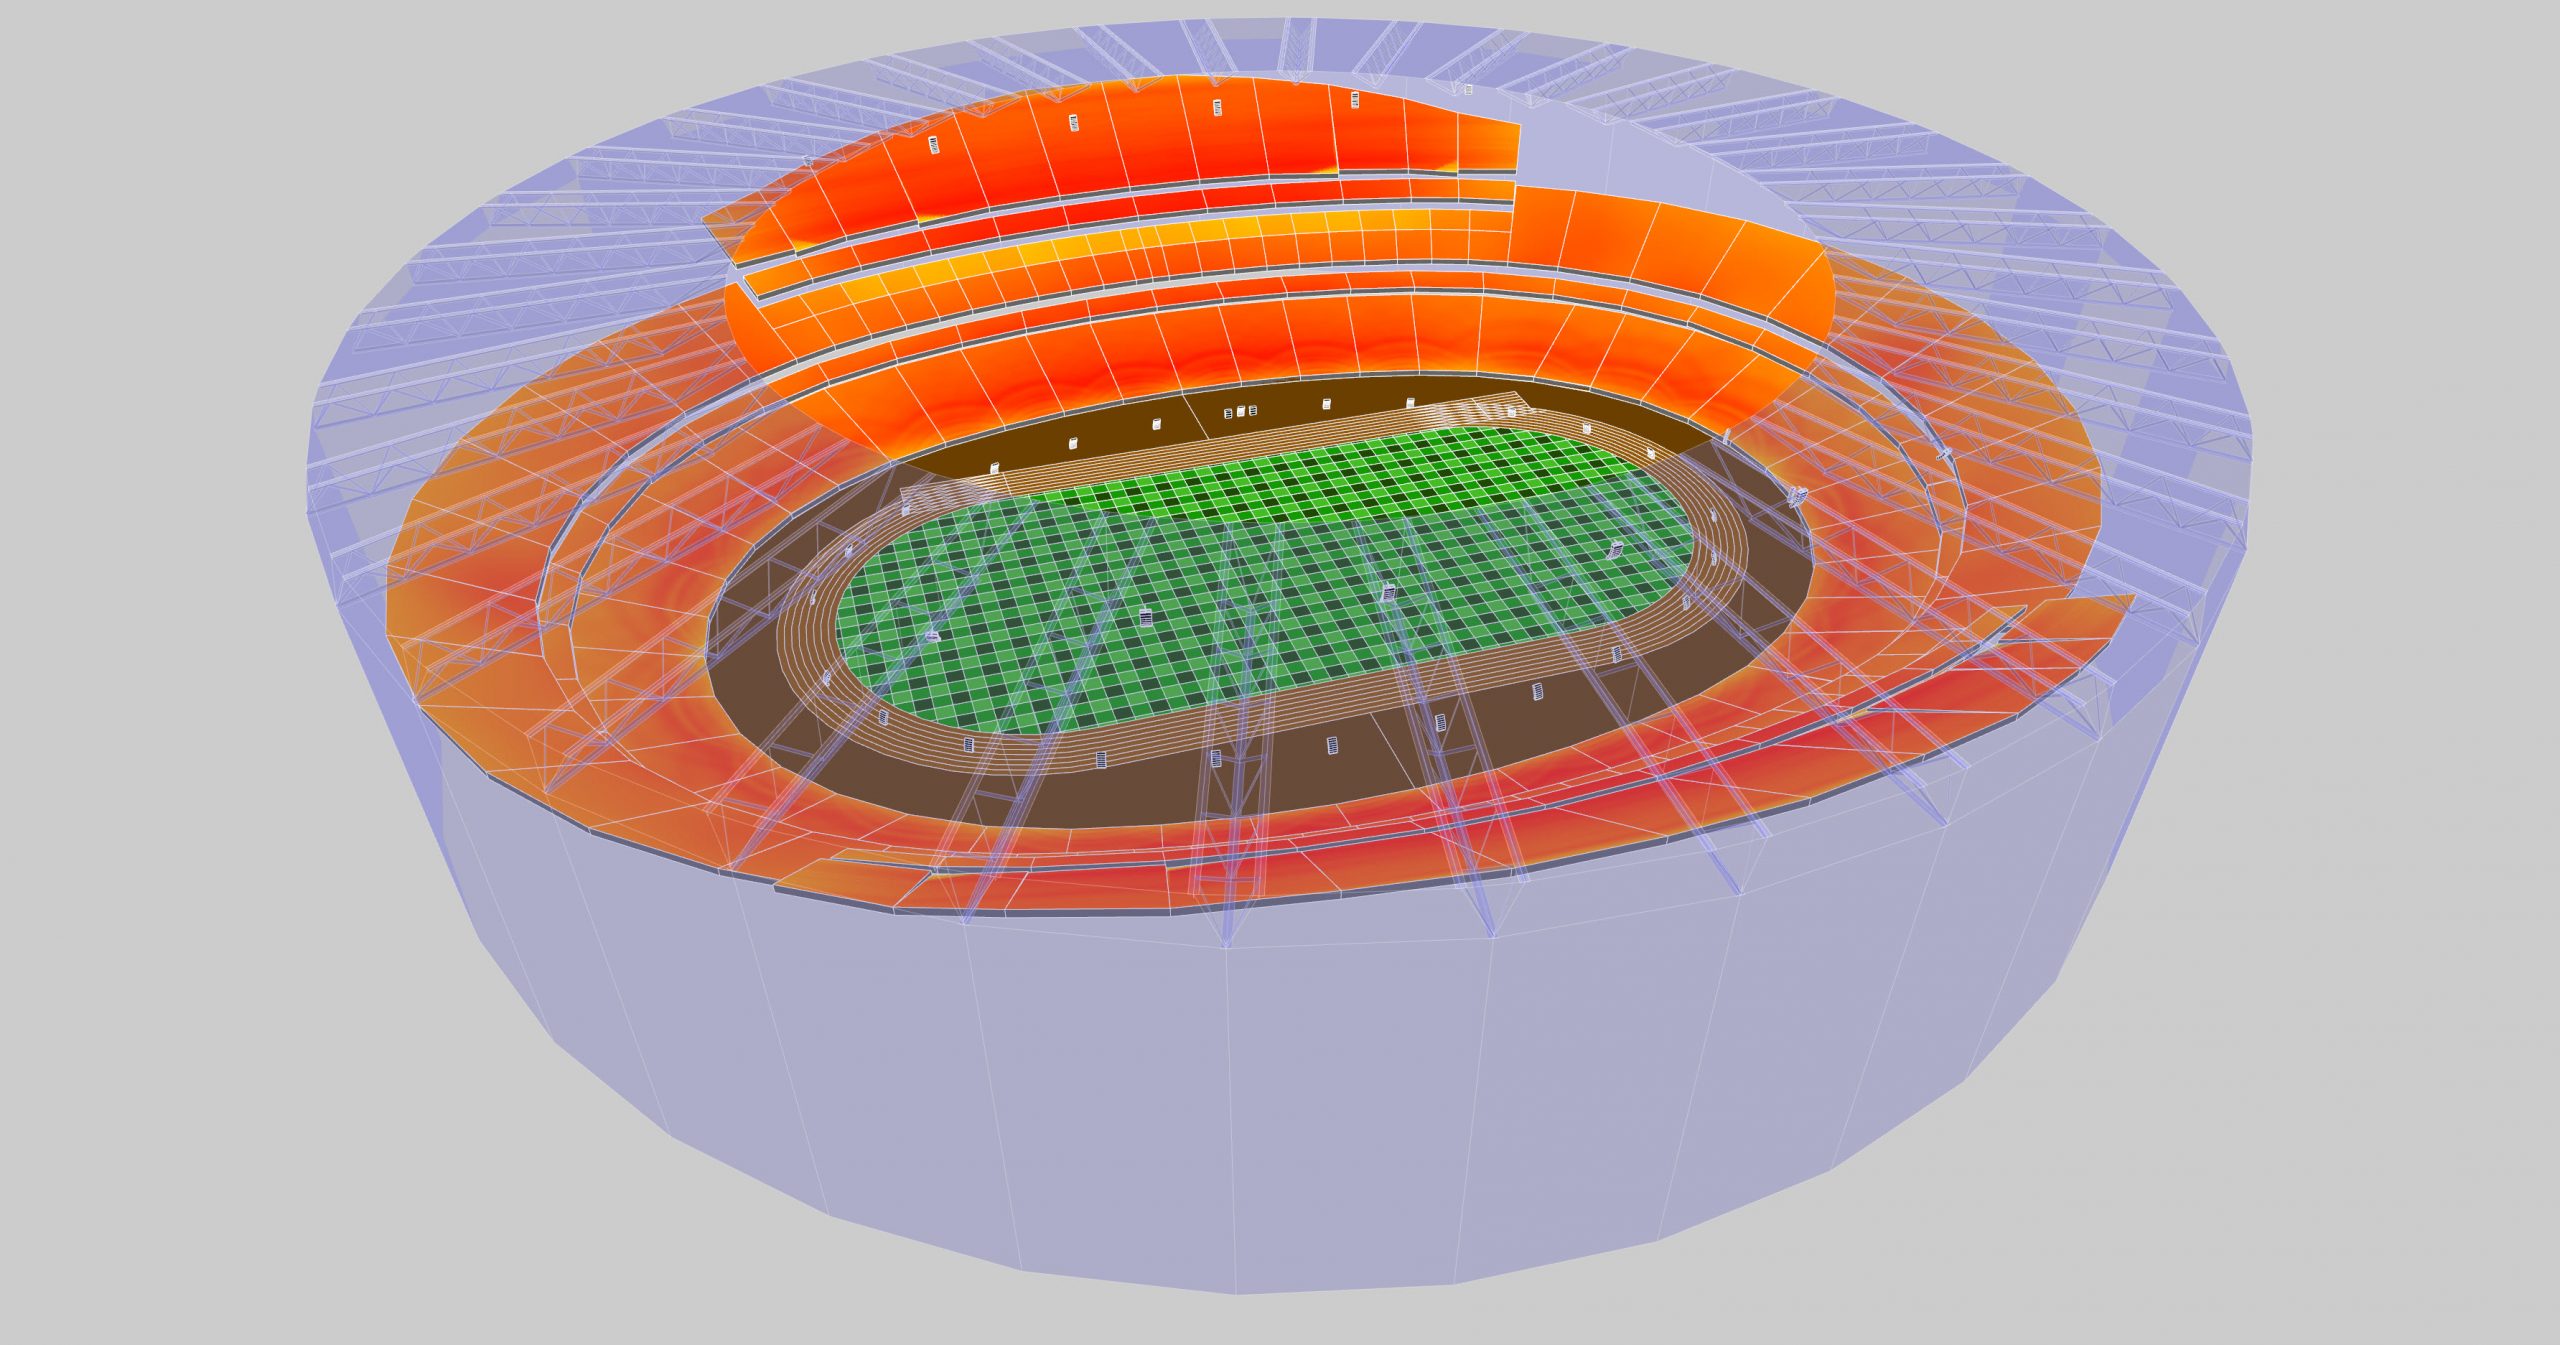 3D Model of sound system set up by L-Acoustics at the European Olympic Games, Baku